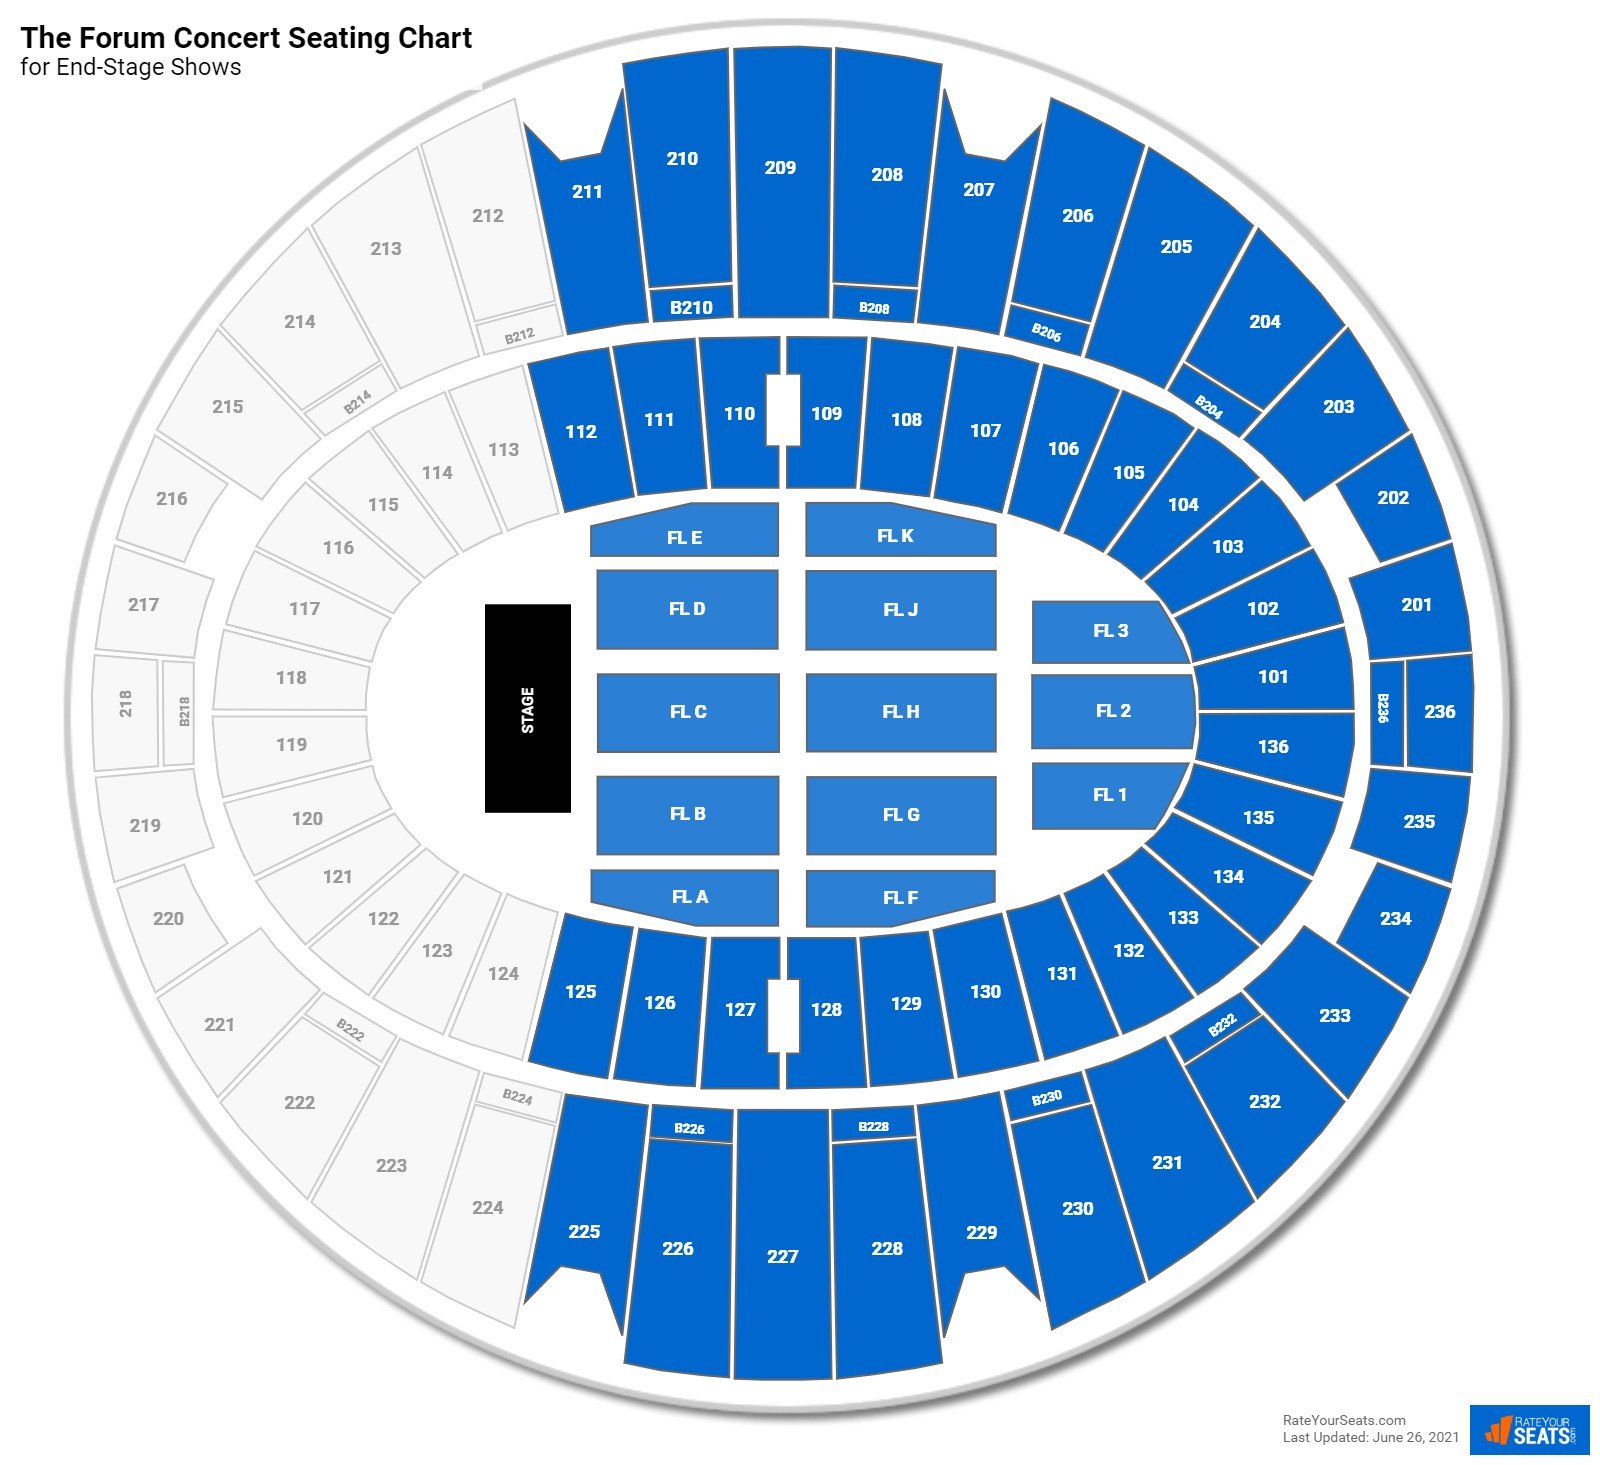 Seating Chart for Concerts.